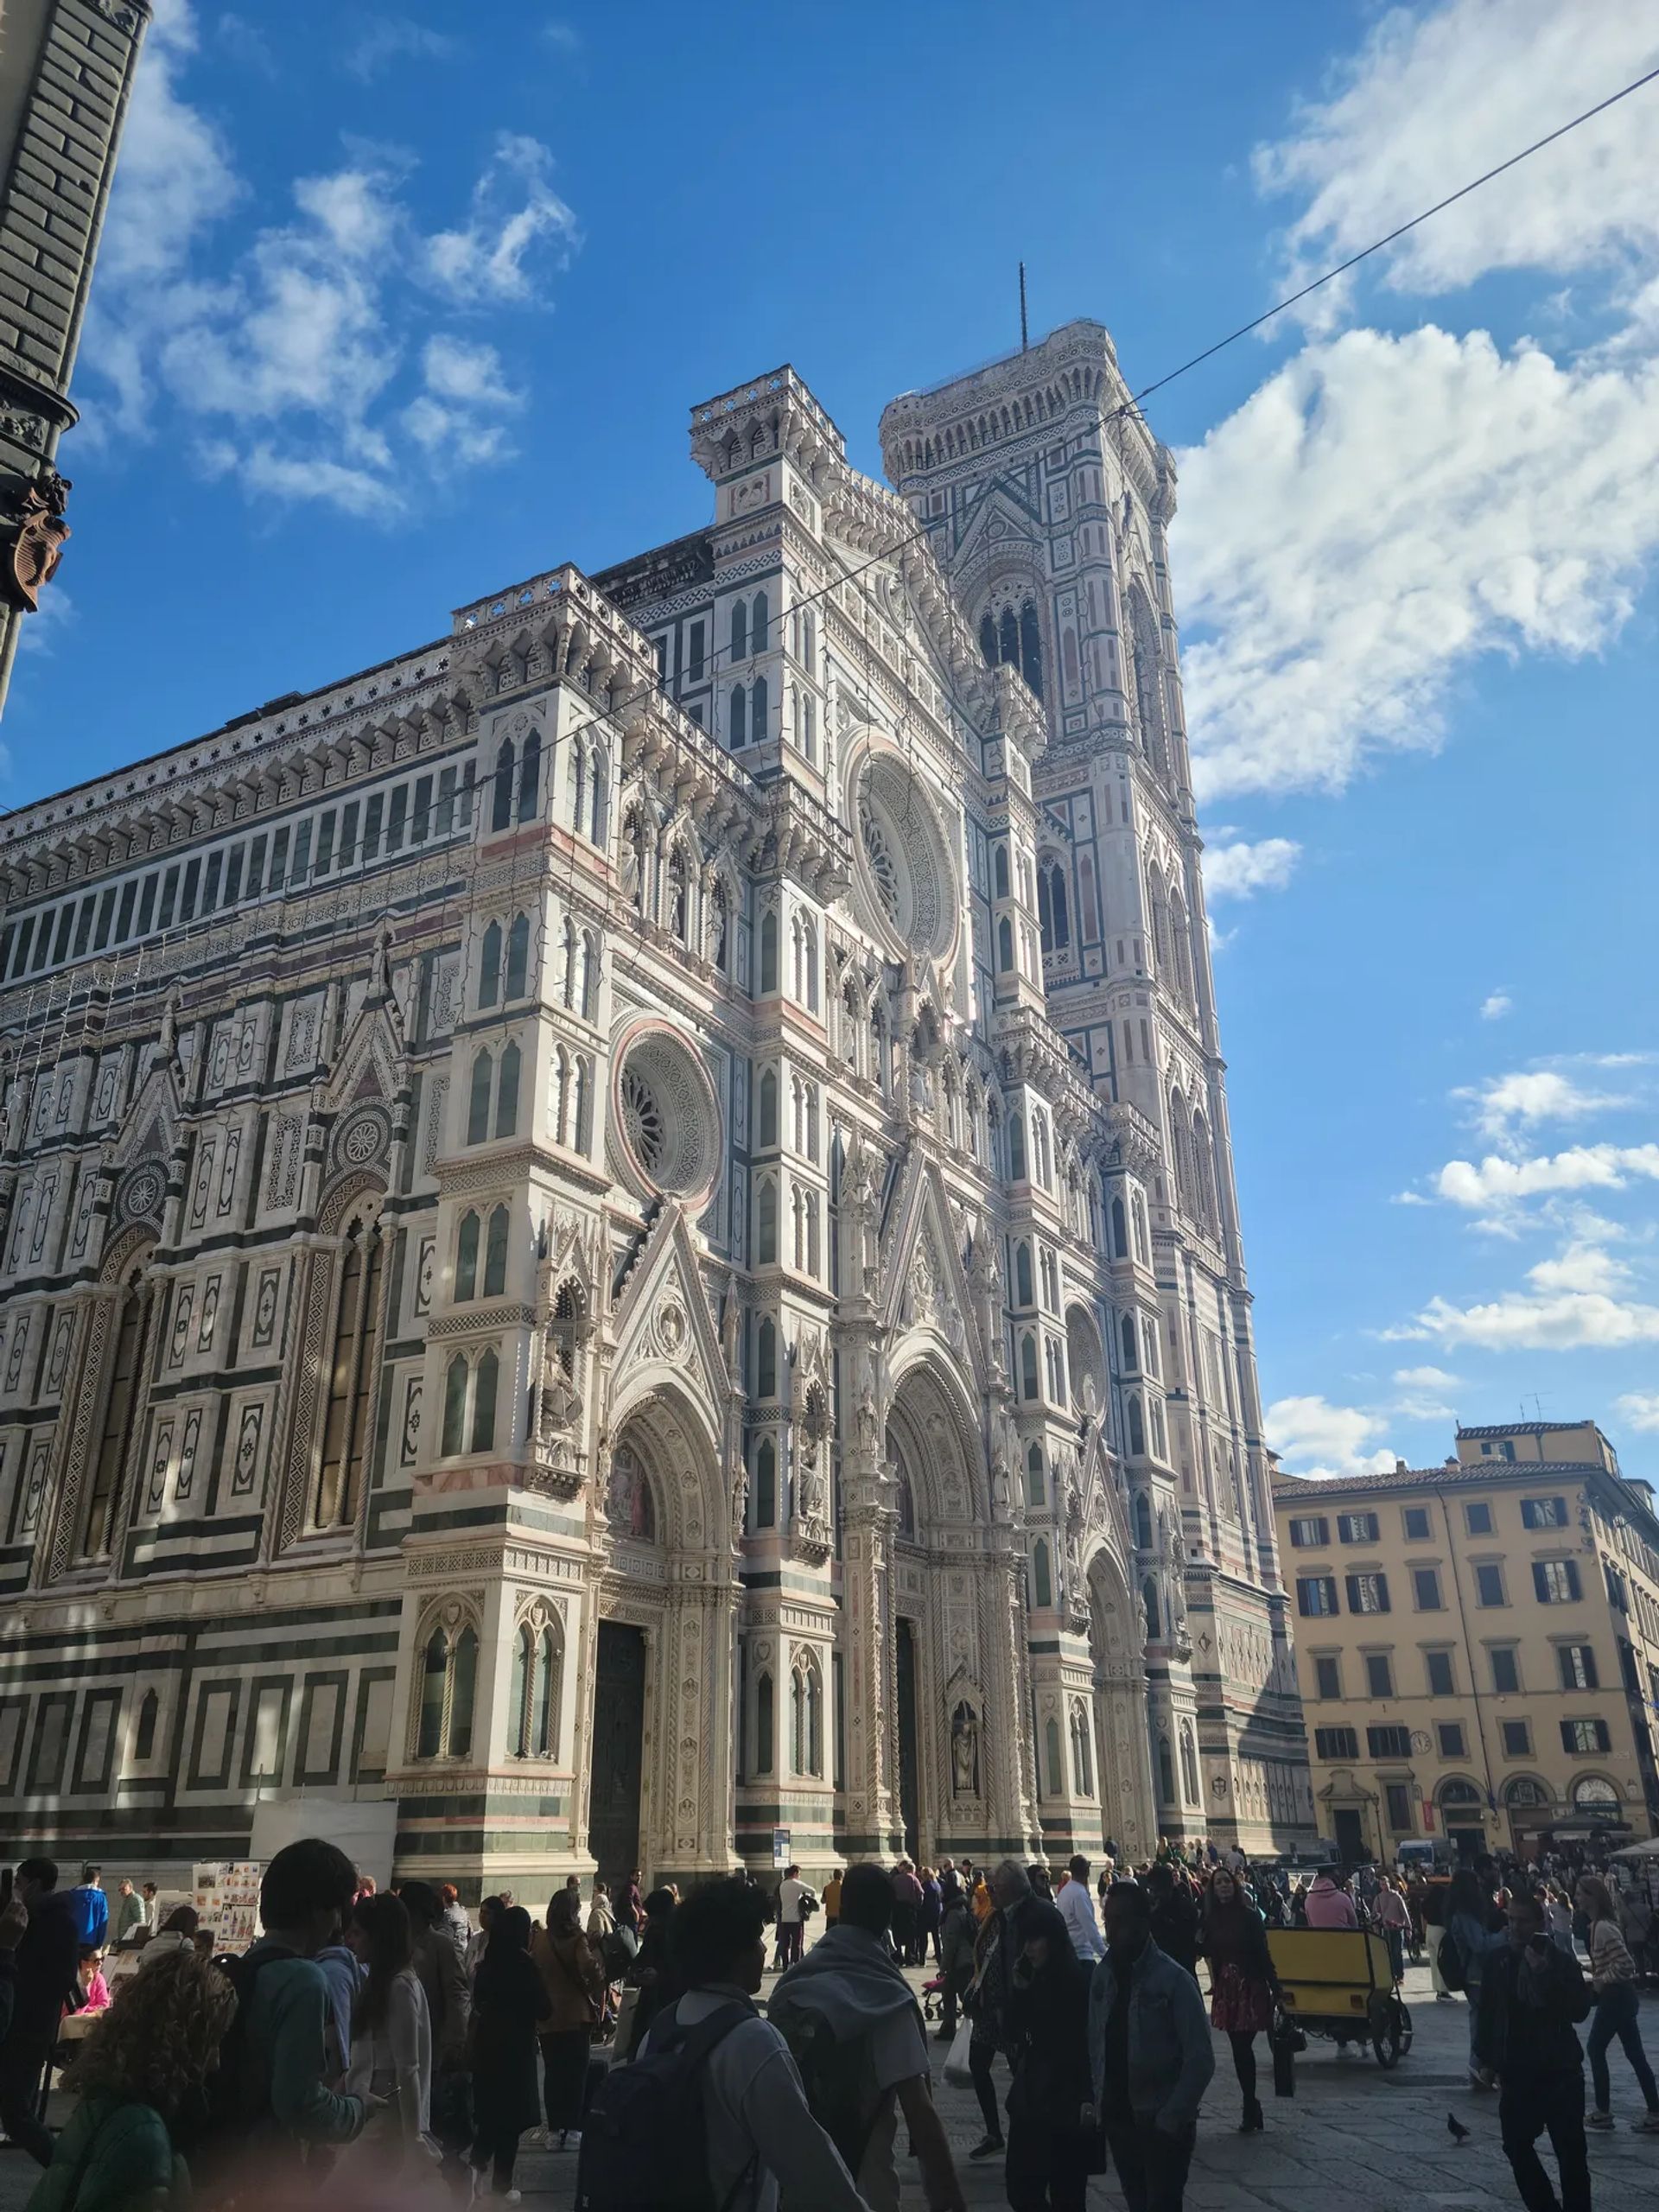 The Awe-Inspiring Cathedral of Santa Maria del Fiore